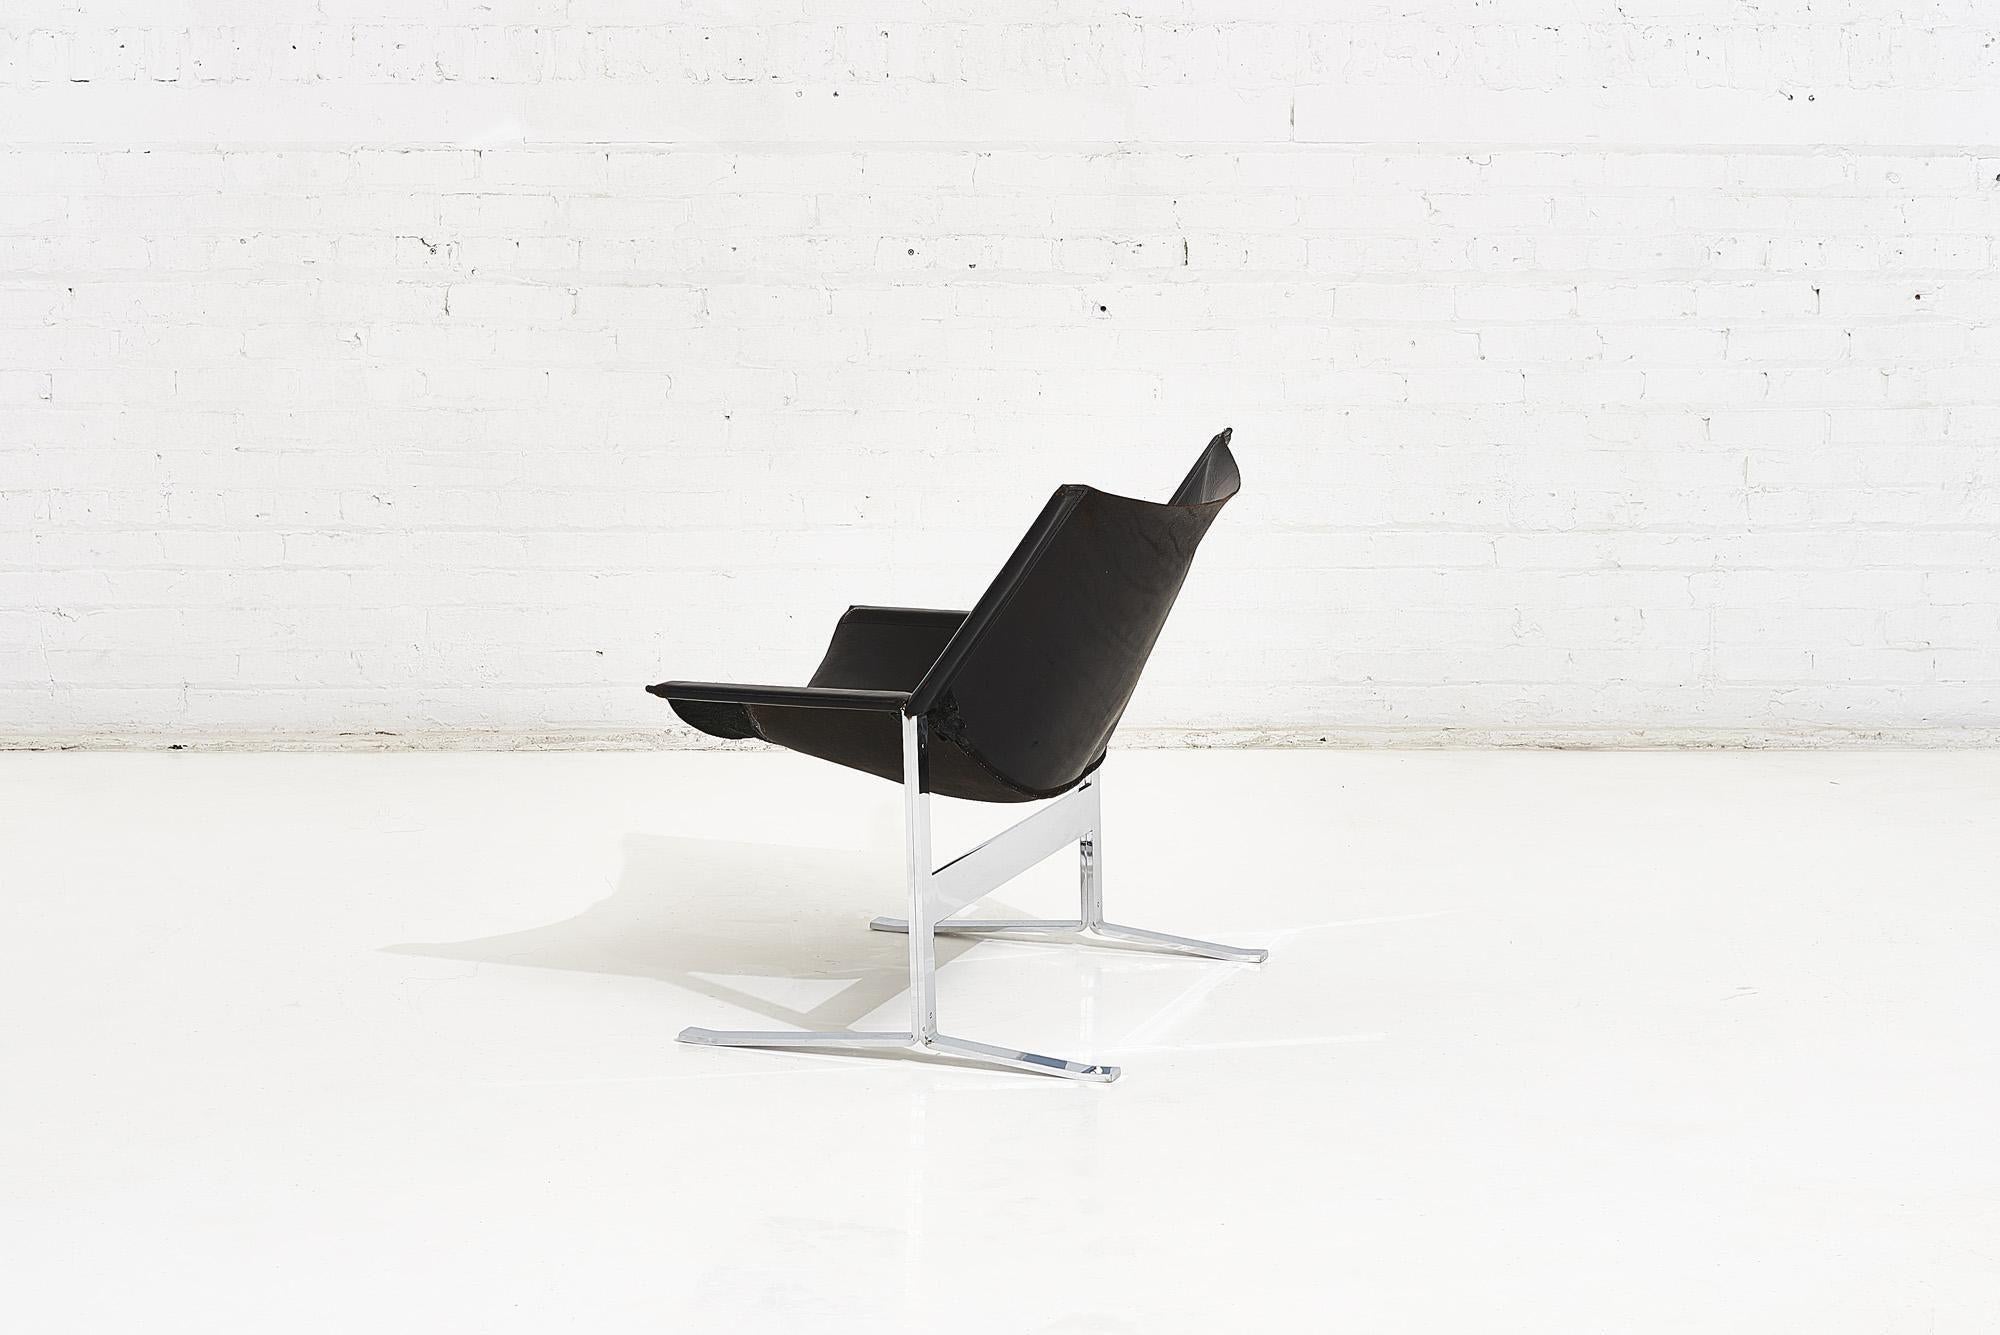 Modern Sling Chair Model 248 by Clement Meadmore, circa 1970